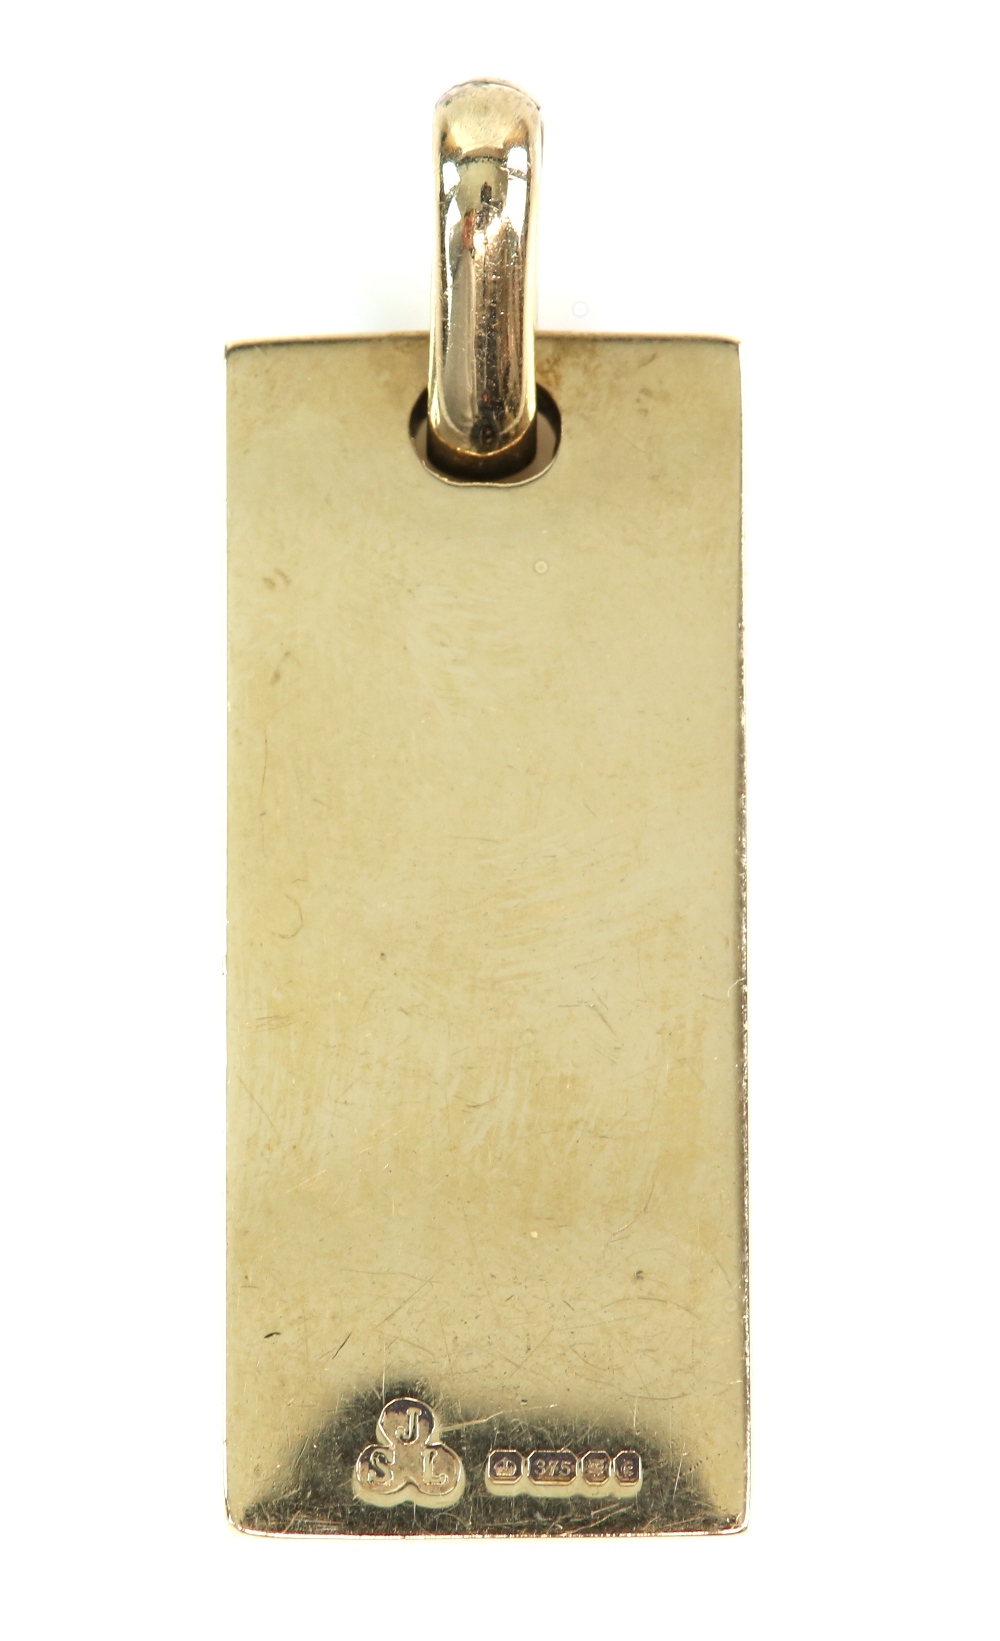 Gold ingot pendant, commemorating the silver jubilee 1952-1977, in 9 ct hallmarked London 1977, - Image 4 of 4